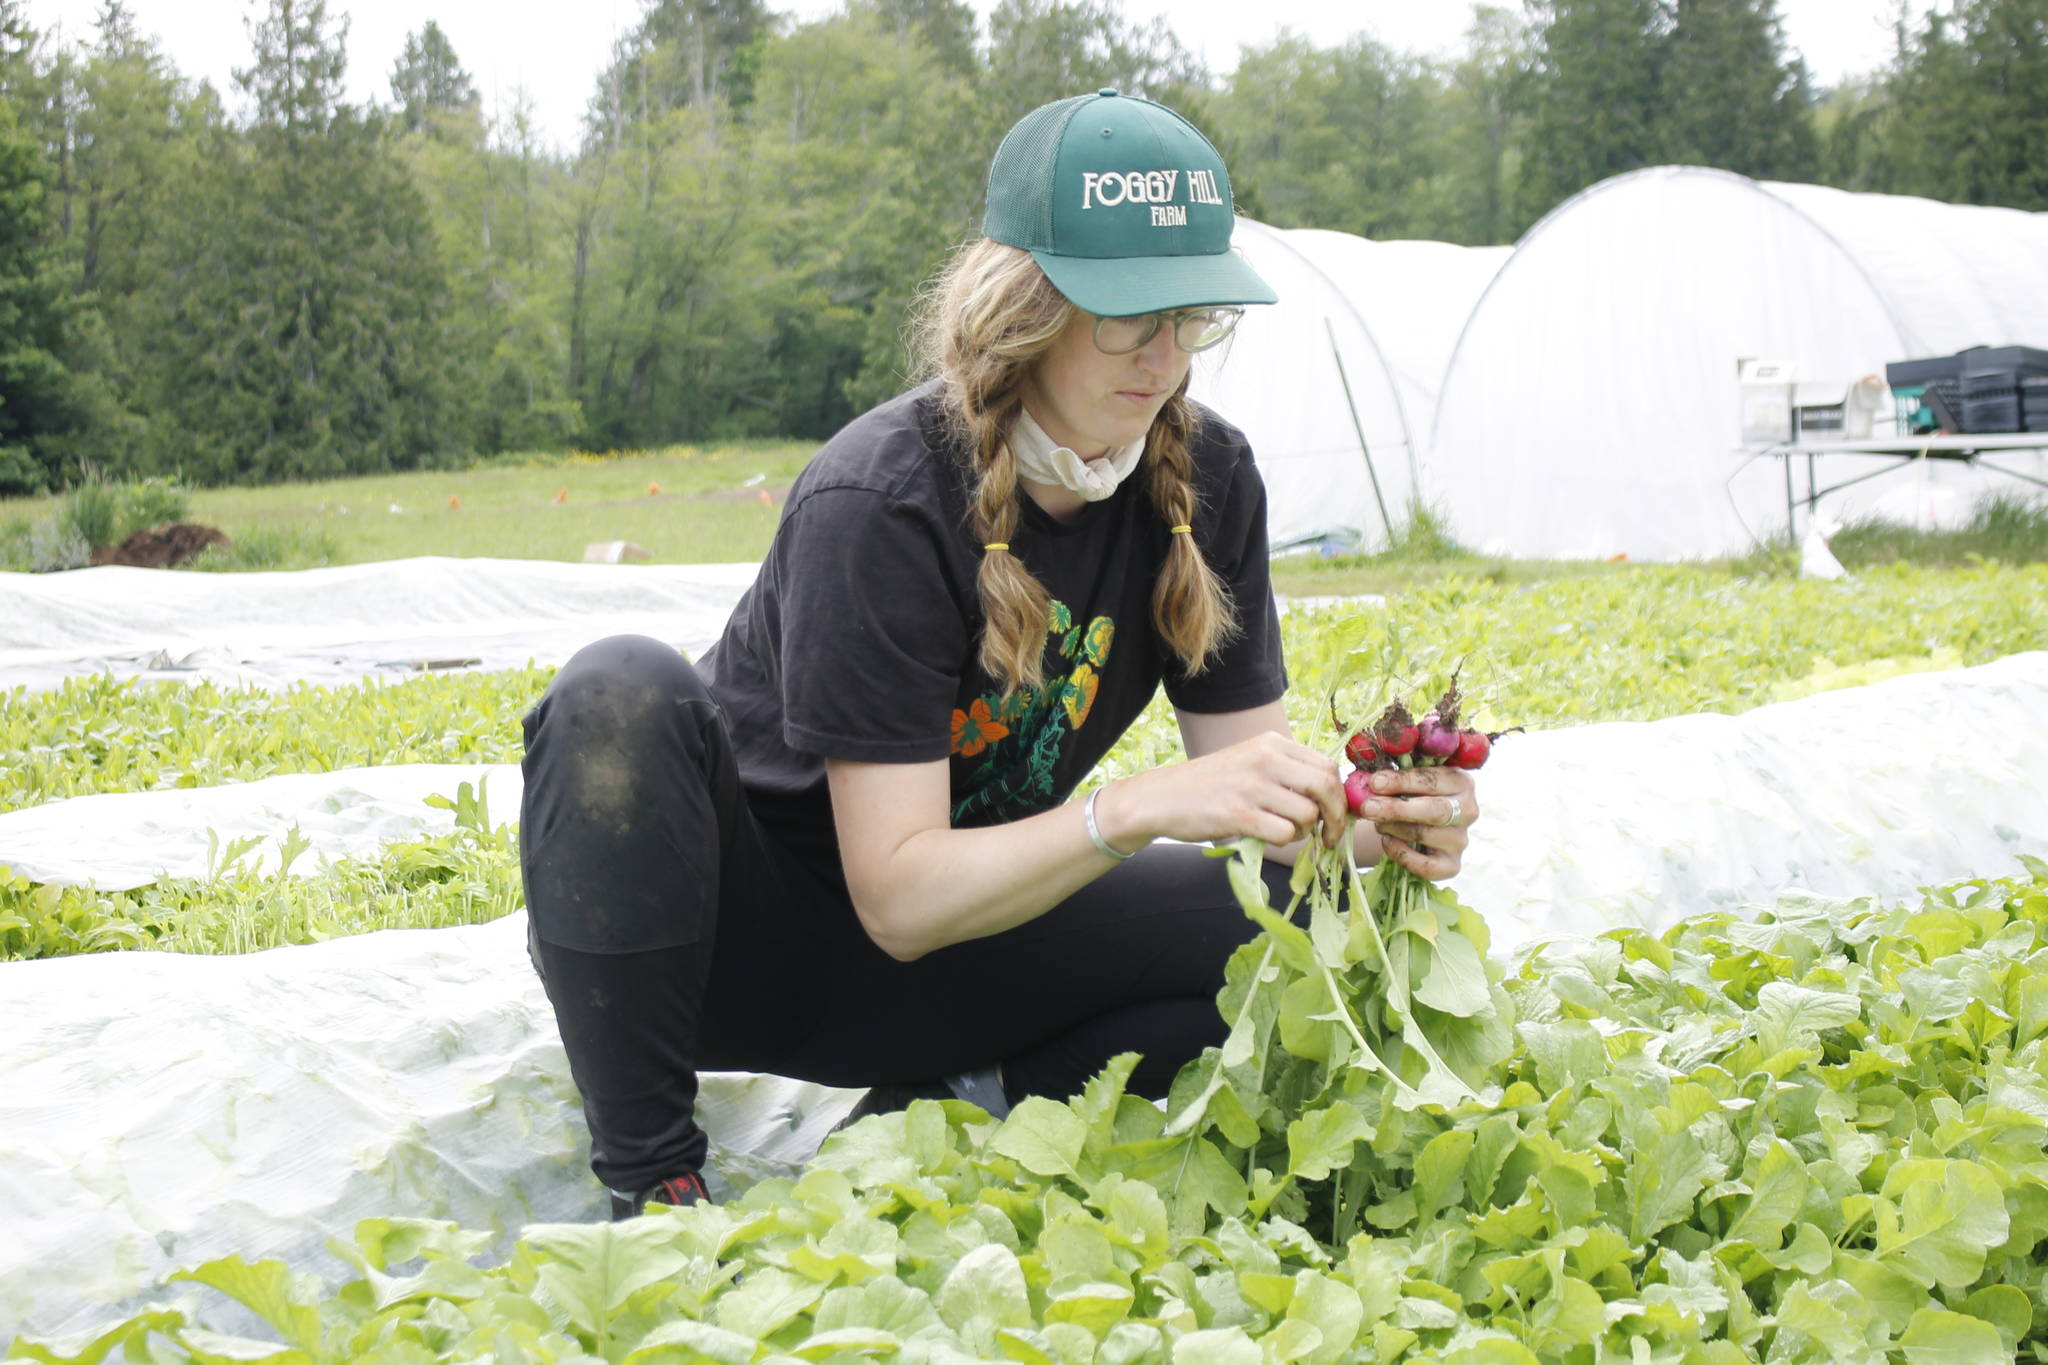 Photo by Kira Erickson/Whidbey News-Times
Farmer Alanah Lawrason of Foggy Hill Farm plucks a handful of radishes from one of her fields.